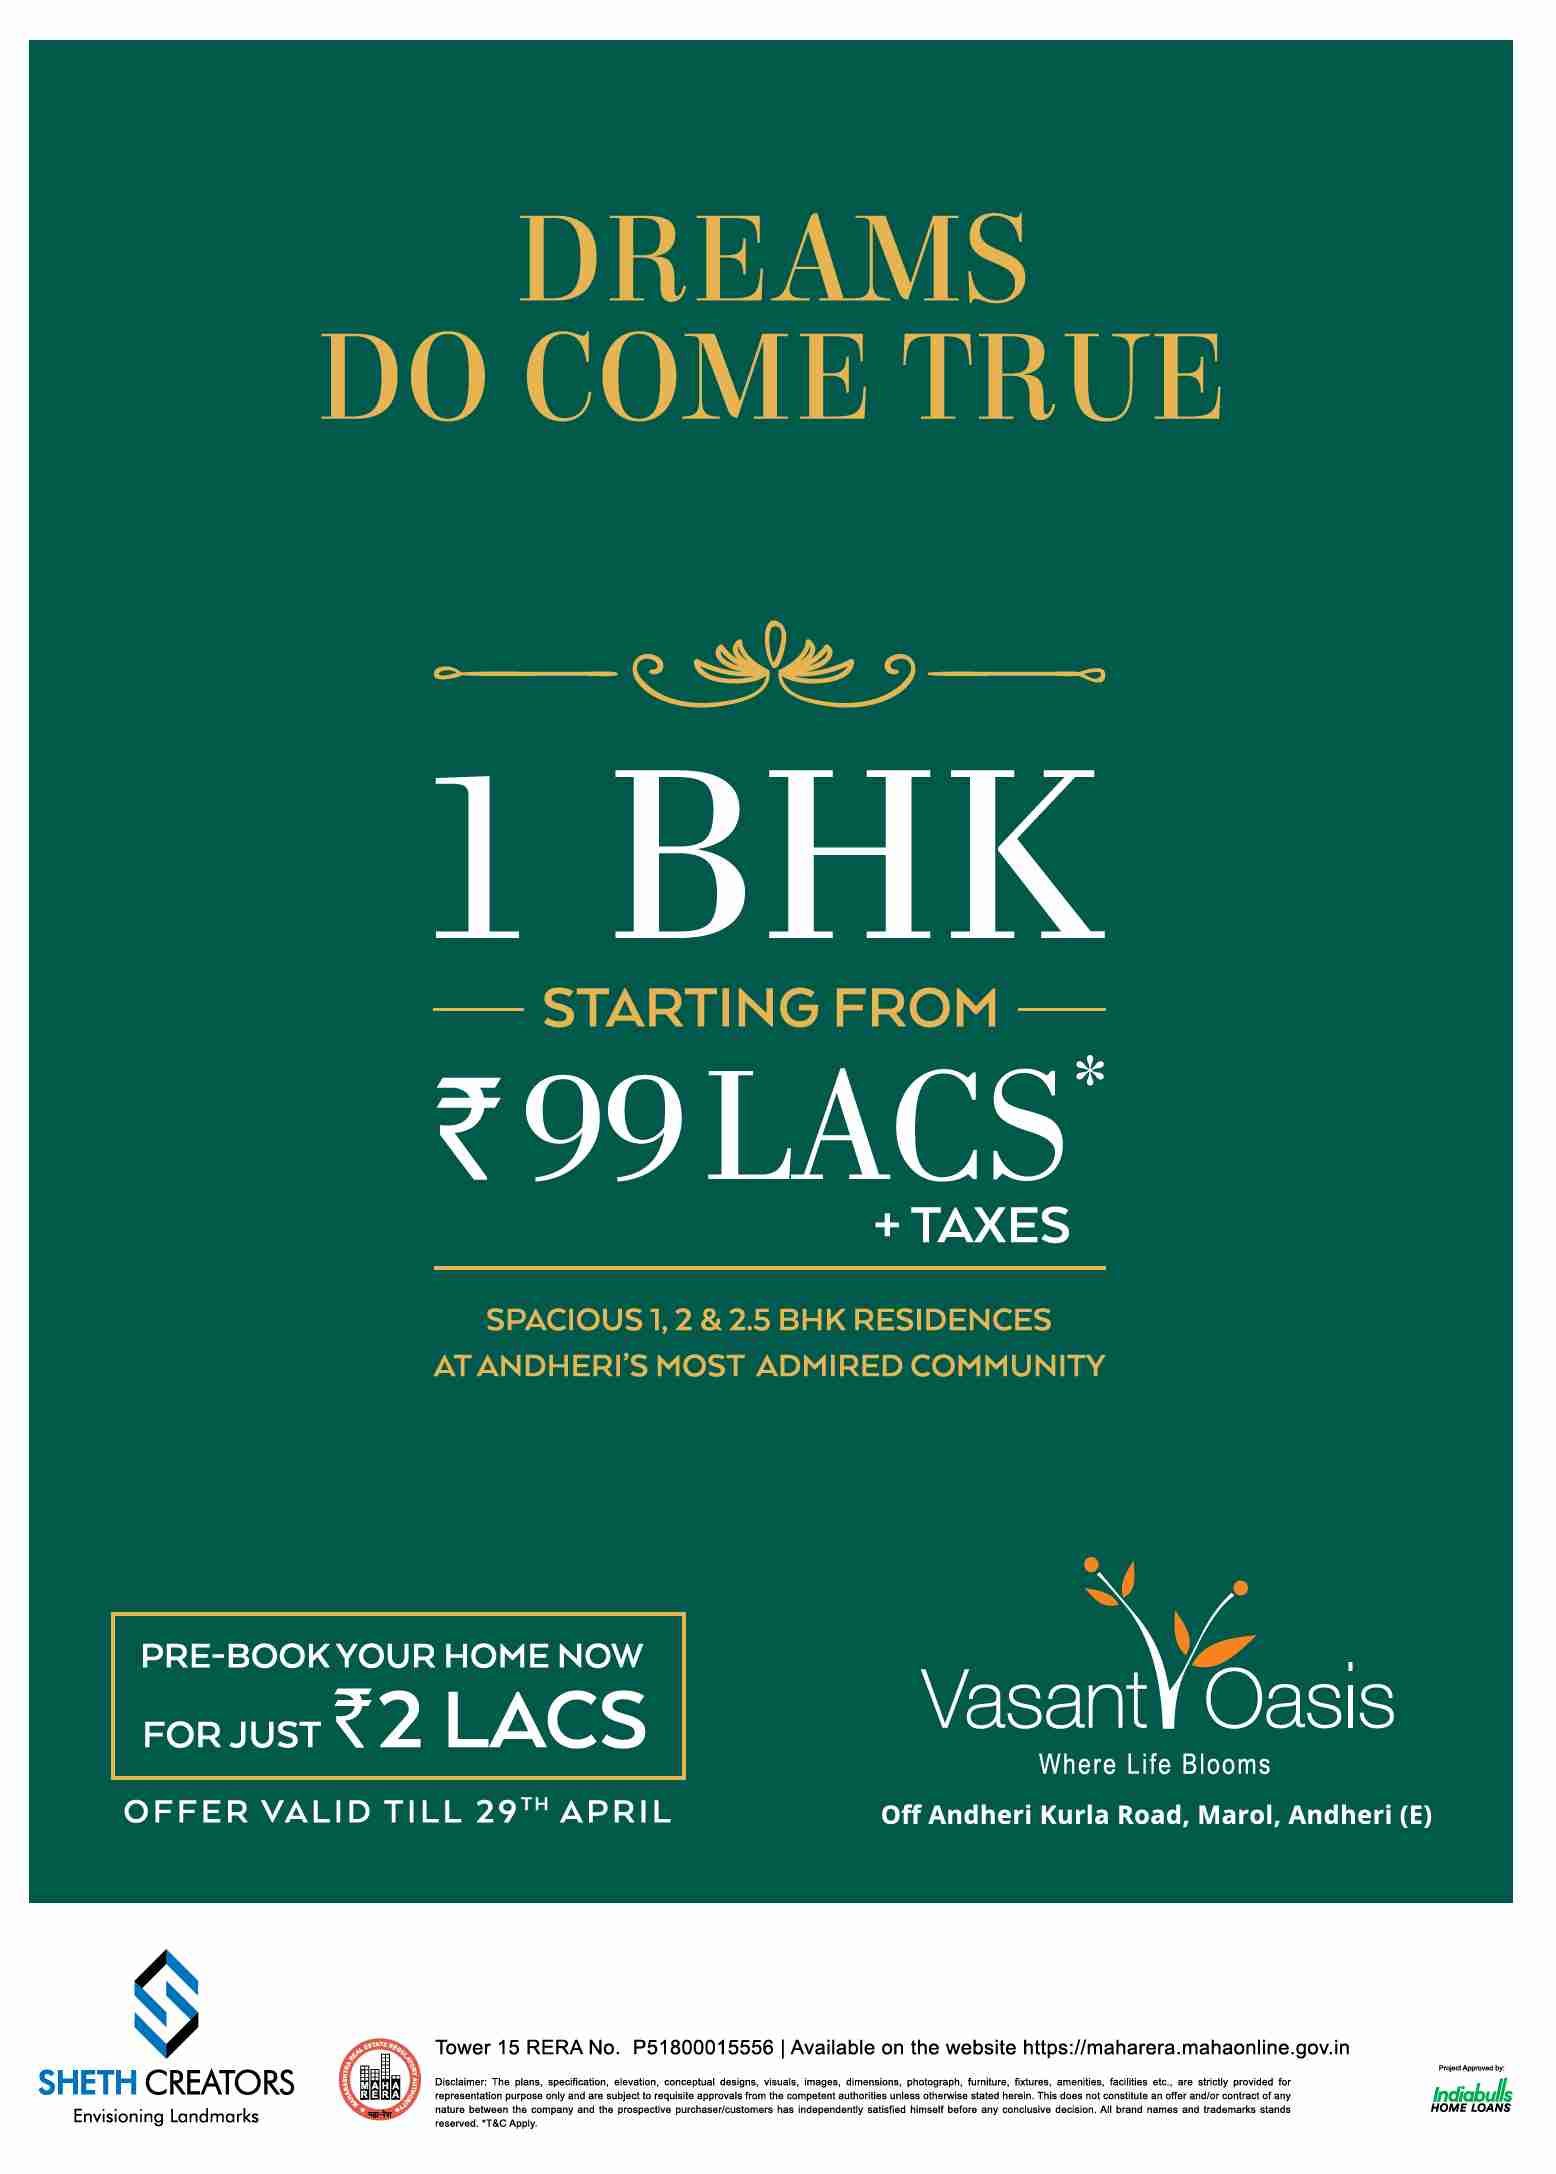 Pre-book your home now for just Rs. 2 Lacs at Sheth Vasant Oasis in Mumbai Update